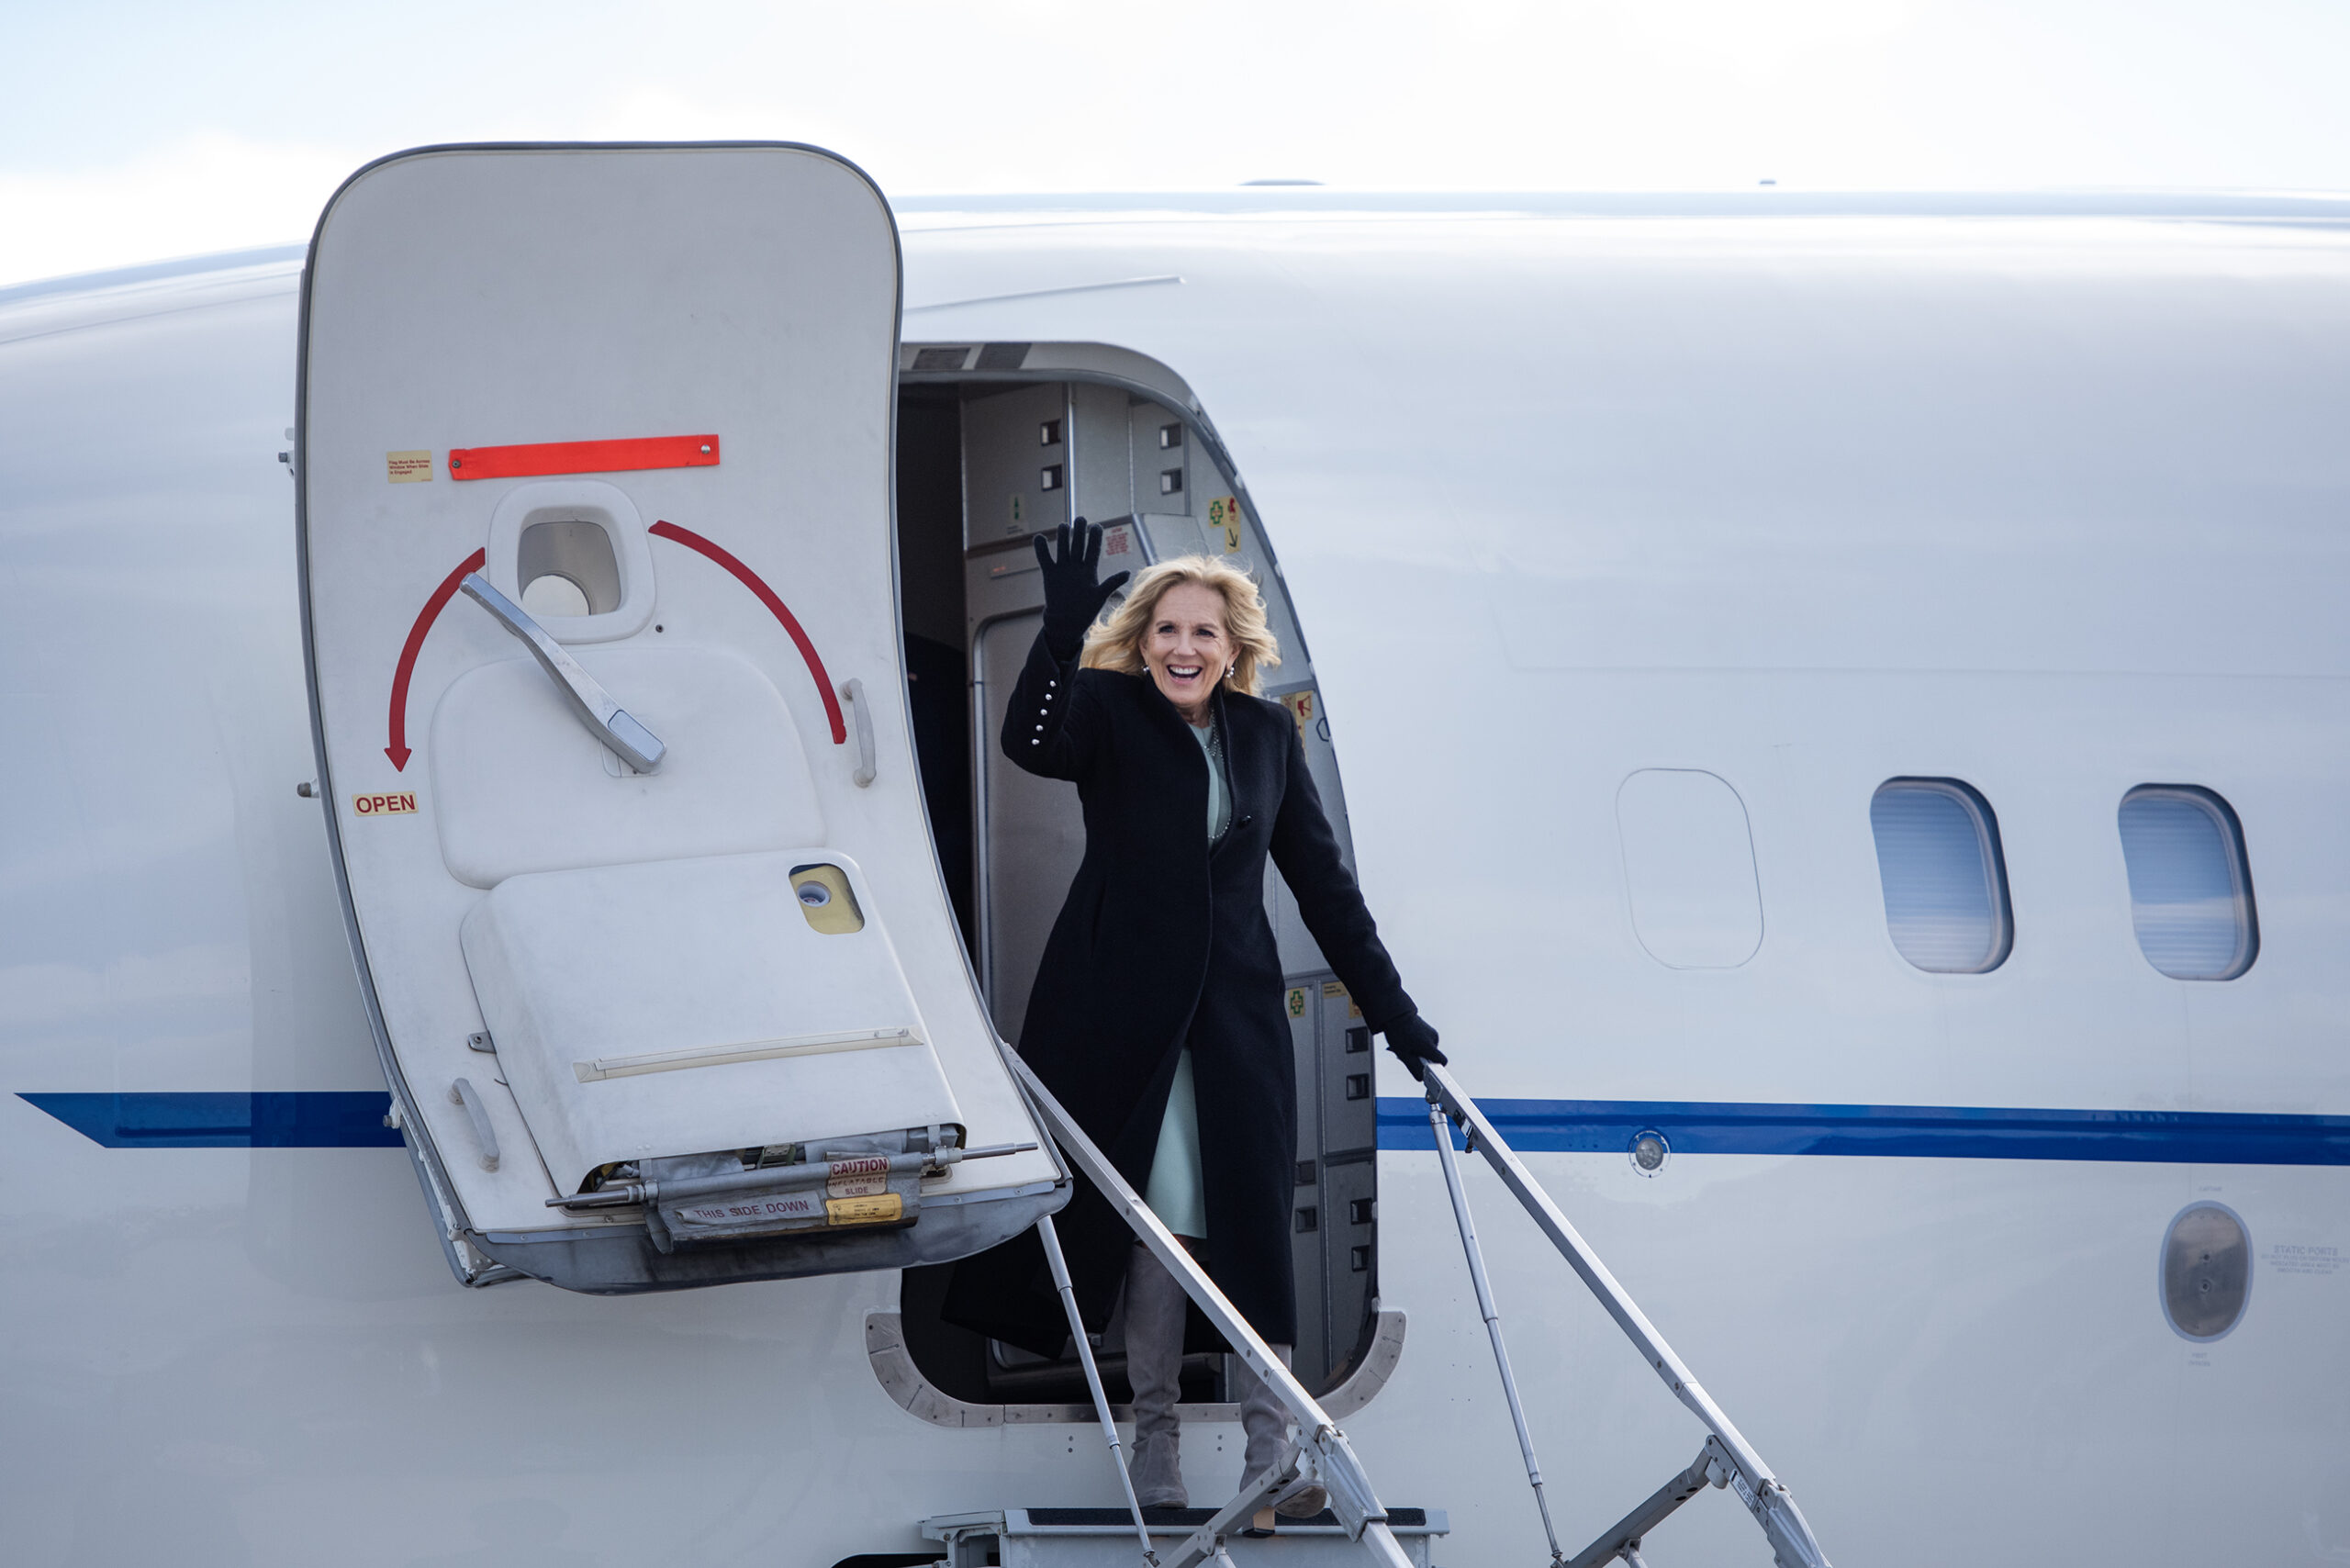 Jill Biden waves as she exits the white aircraft. She wears a black coat and black gloves.